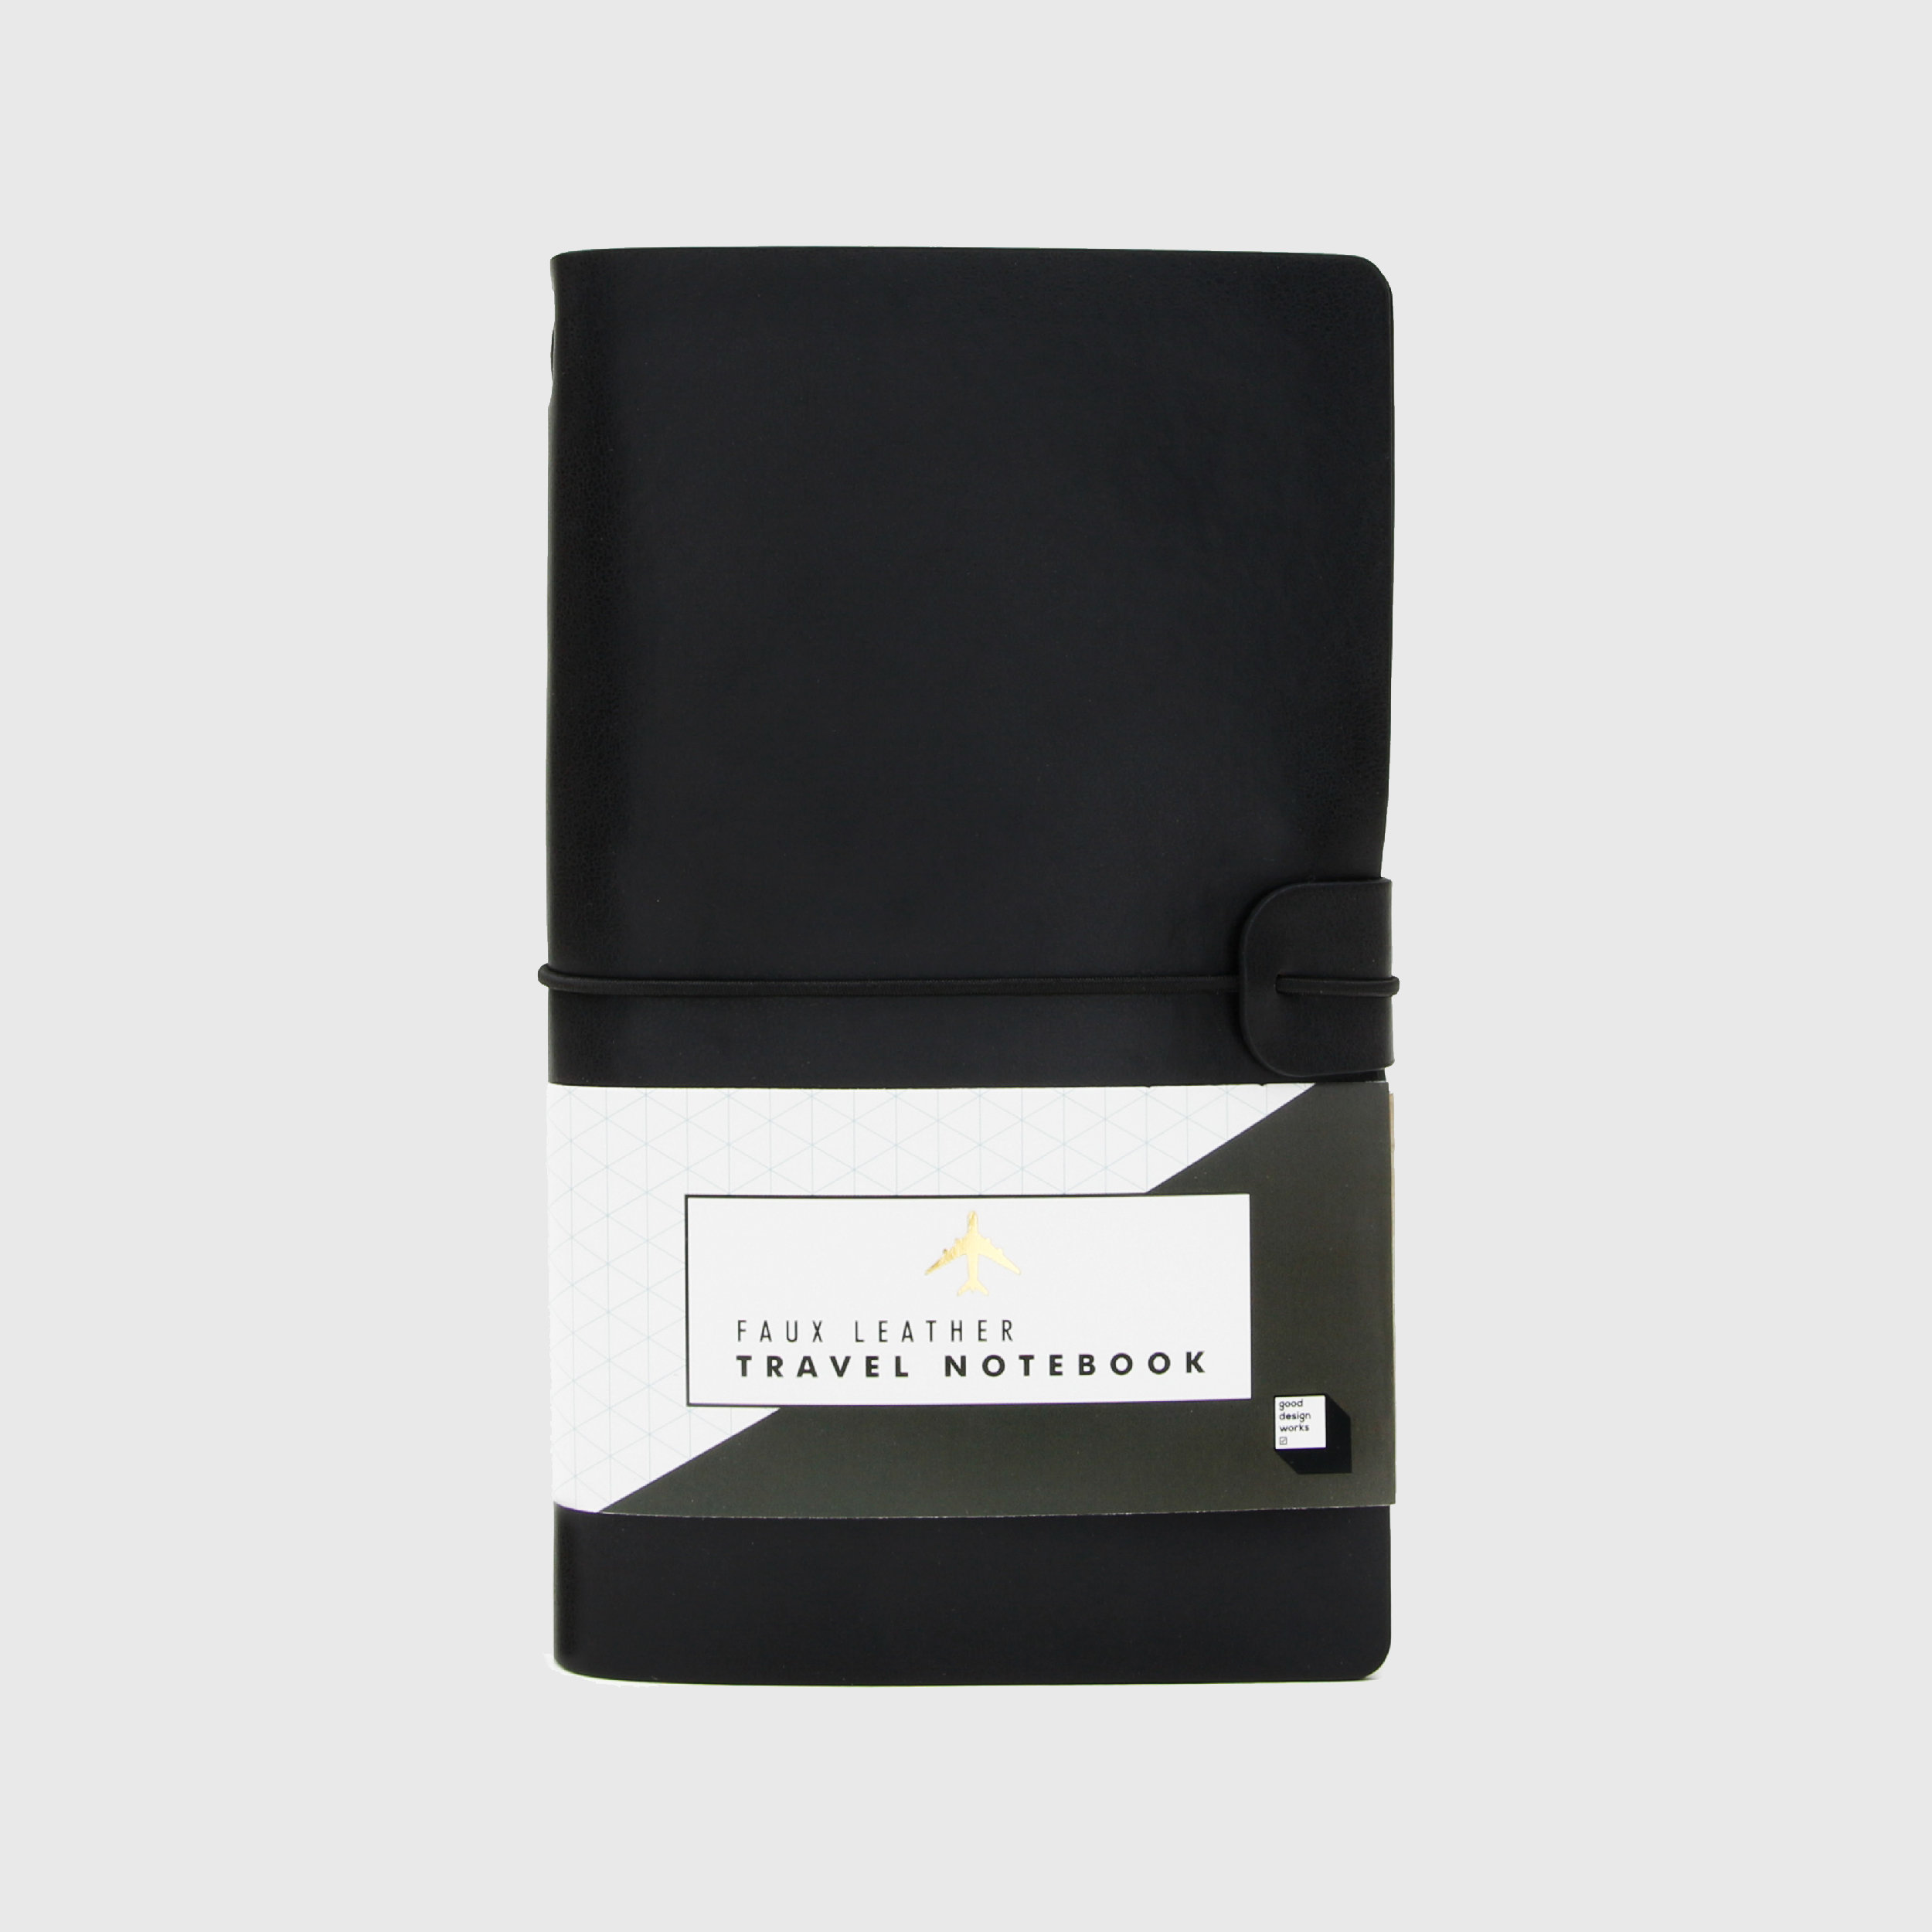 Black faux leather travel journal and passport holder